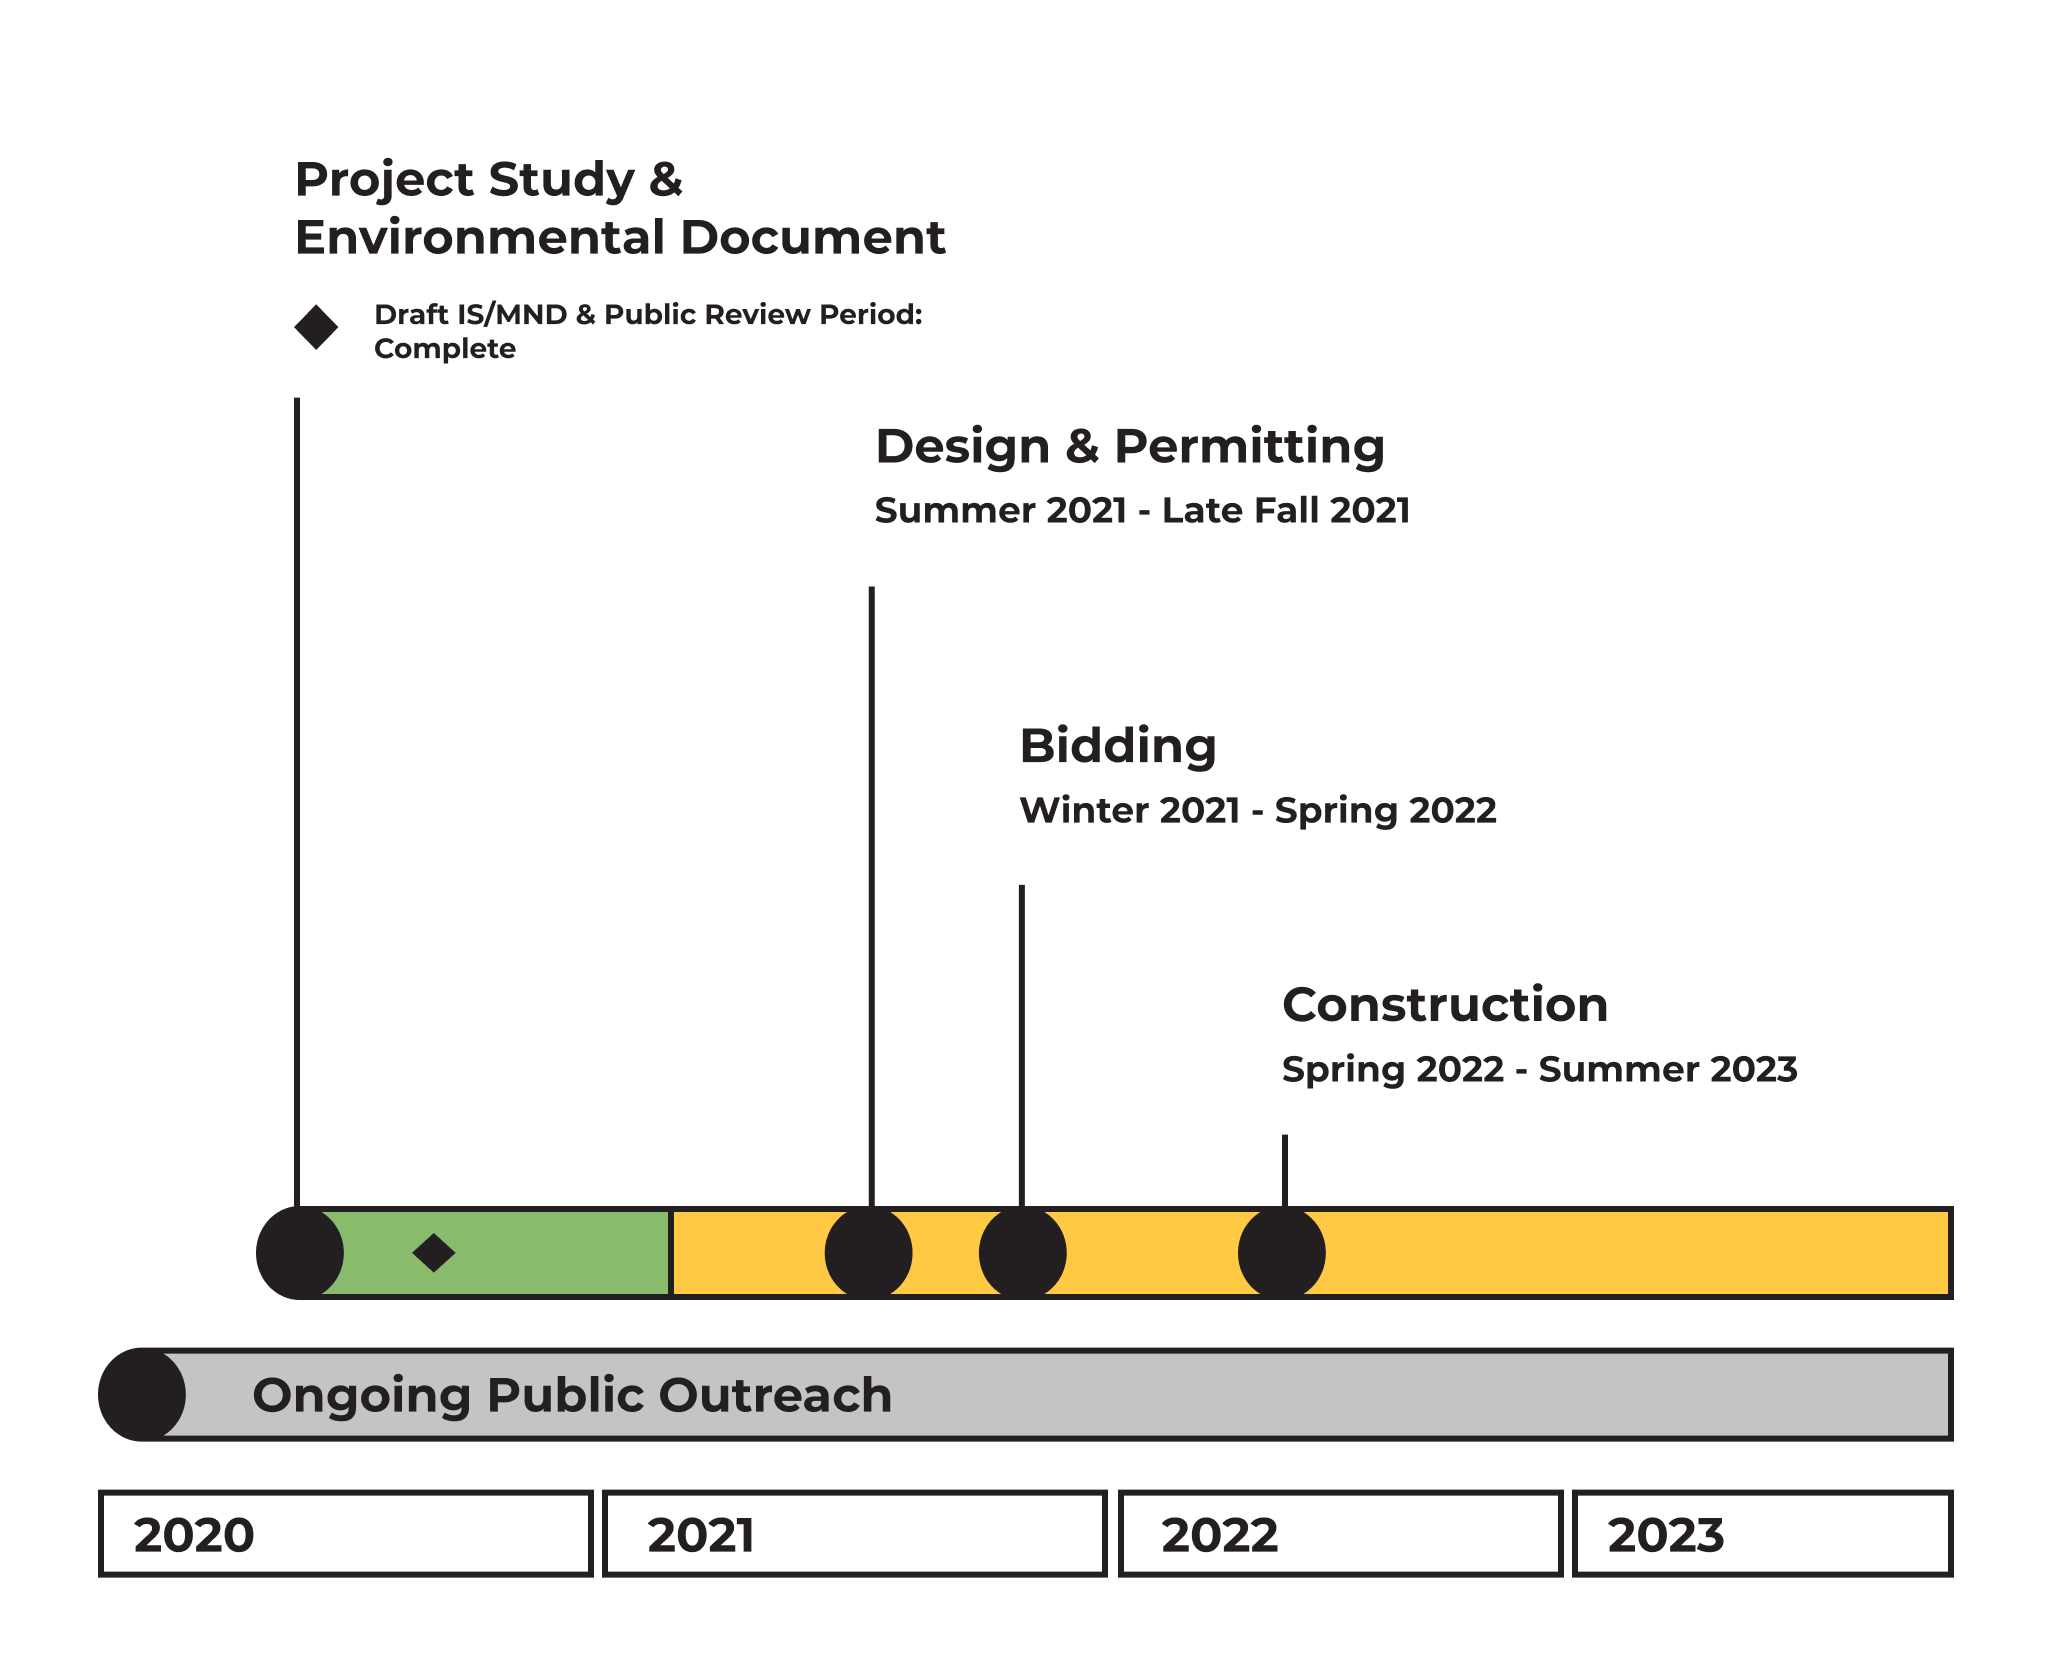 The project study and environmental phase runs  from spring to winter 2020. The Draft IS/MND and Public Review period is complete. Design and permitting happens from summer 2021 to late fall 2021. Bidding happens in winter 2021 to spring 2022. Construction happens Spring 2022 to summer 2023. public outreach is ongoing from 2020 to 2023.